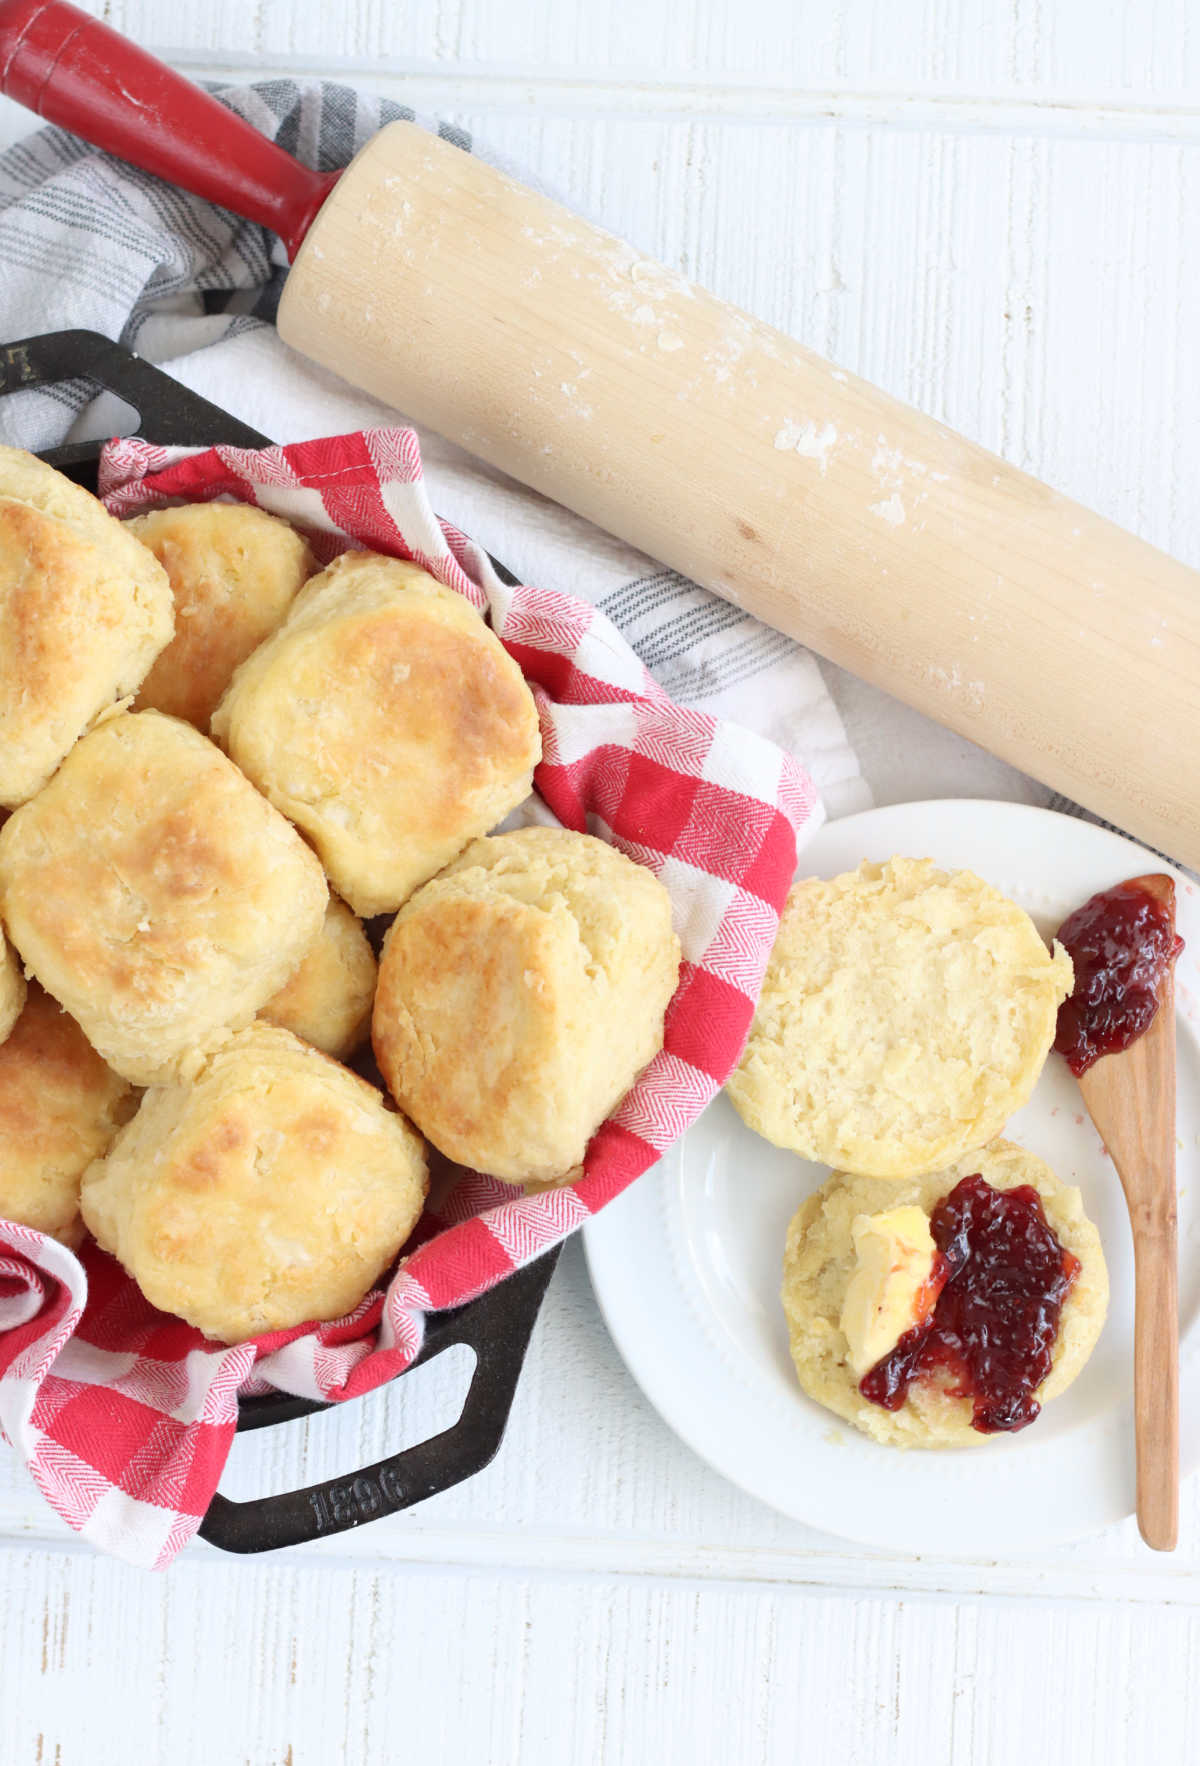 Biscuits in cast iron skillet with red checkered cloth, biscuit with jam on white plate to side.